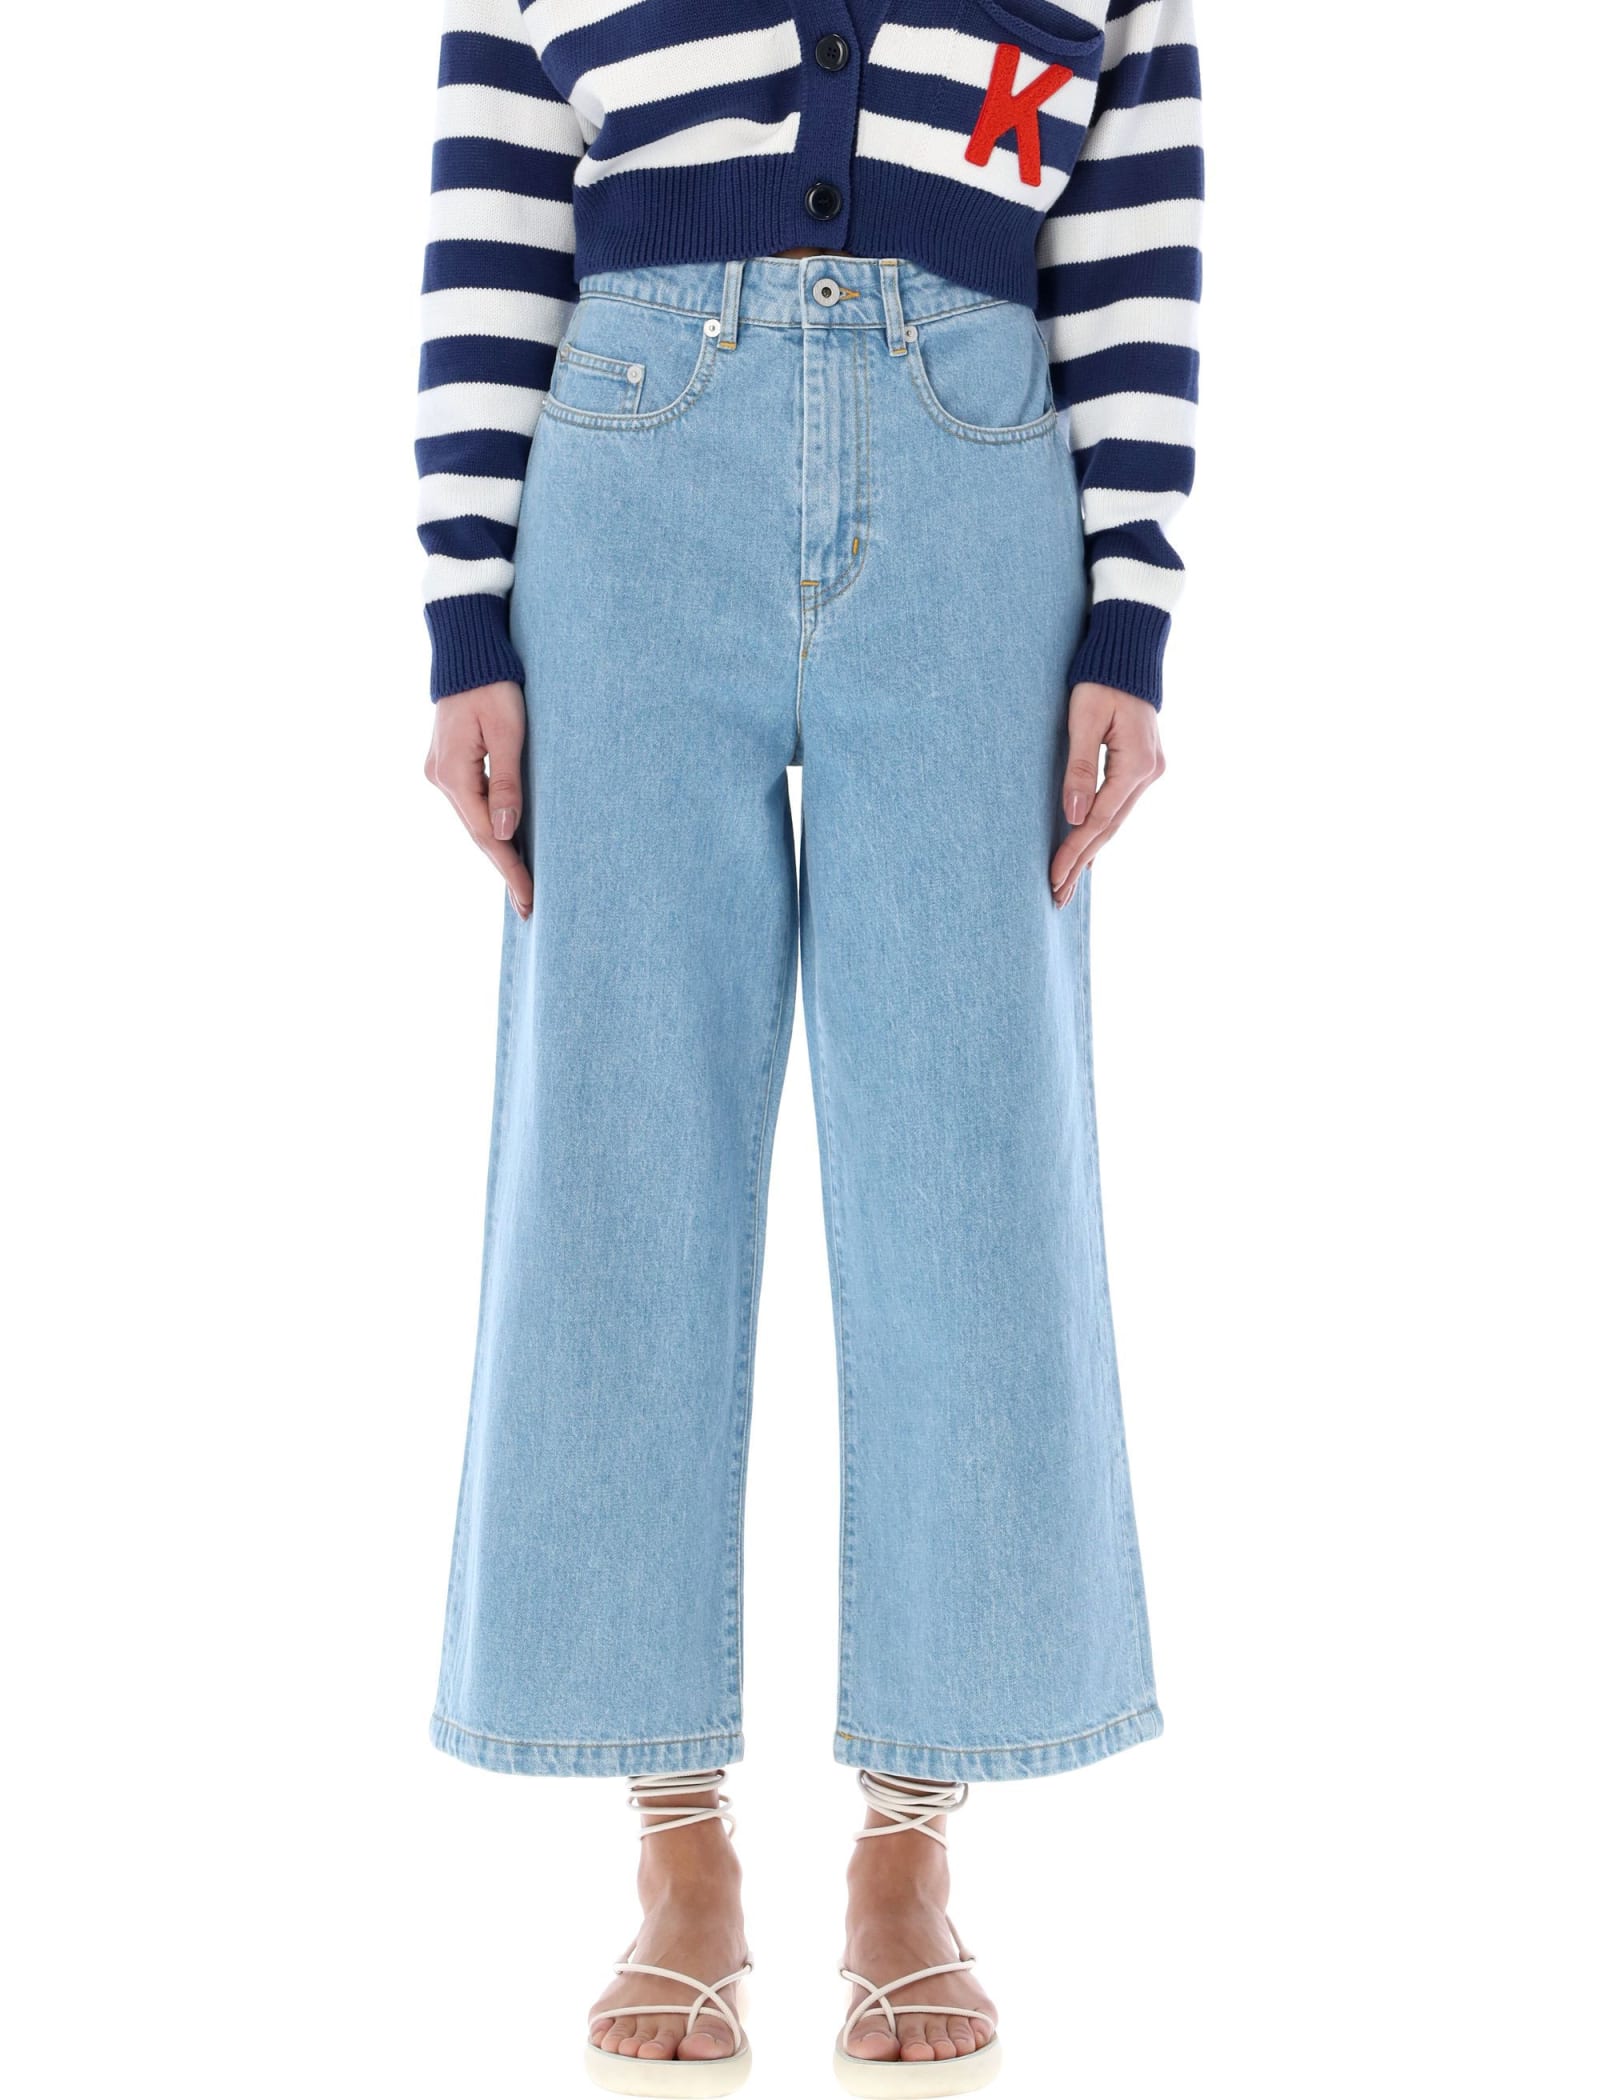 KENZO SUMIRE CROPPED JEANS